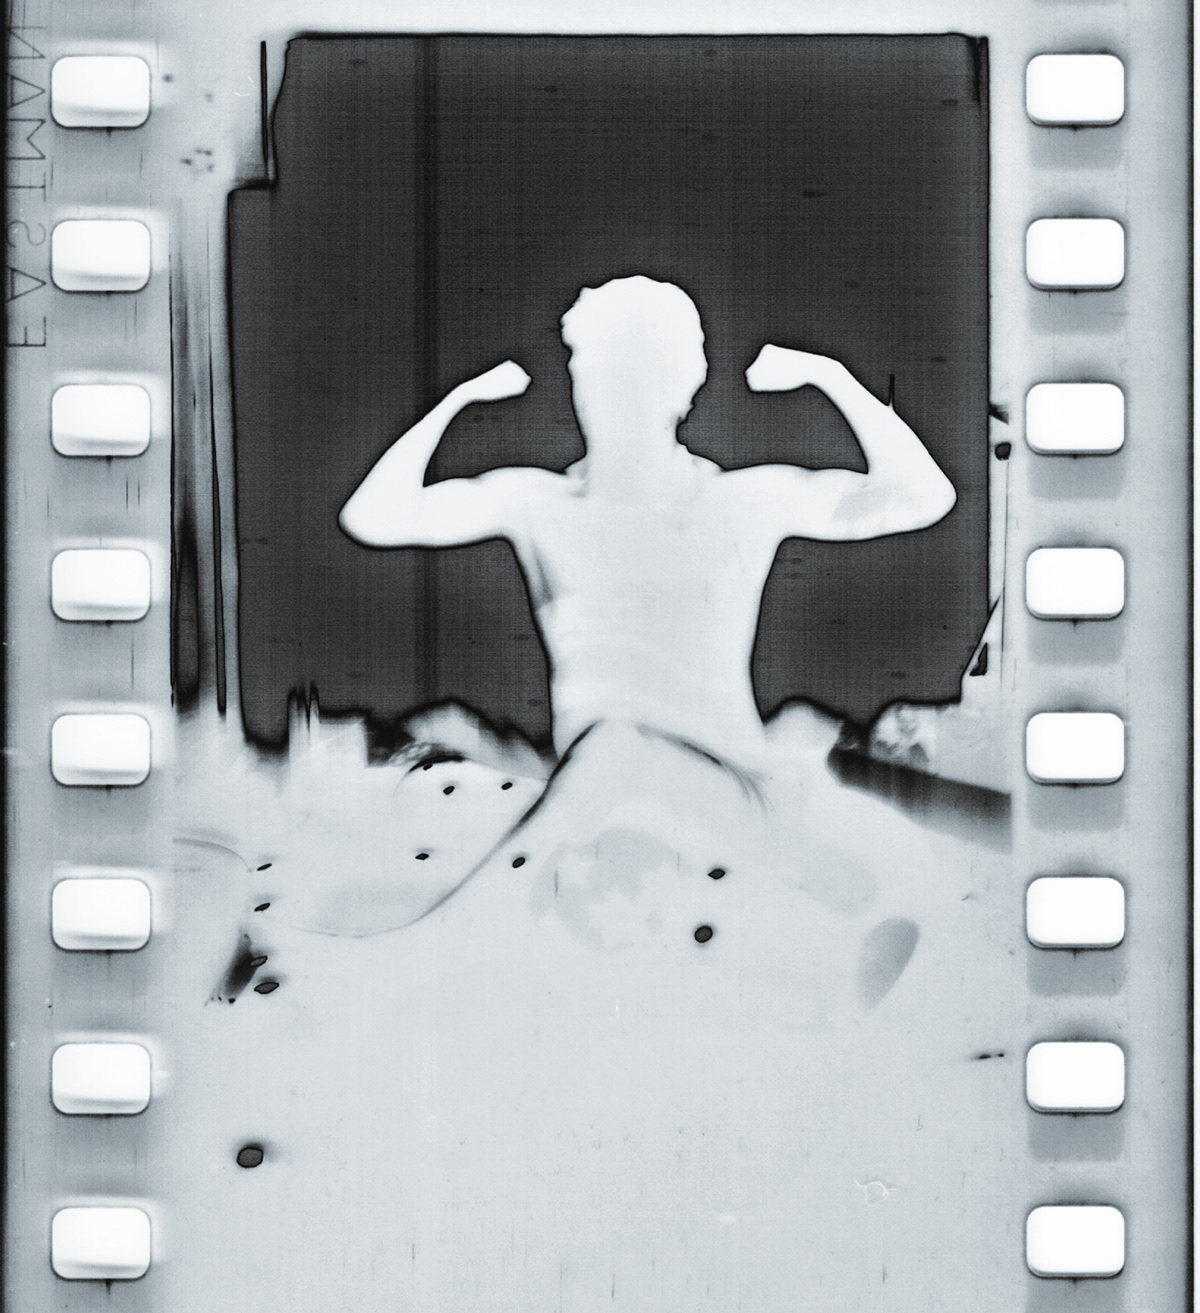 lith surrealism double exposure surreal black and white portraitur creative Analogue FilmPhotography